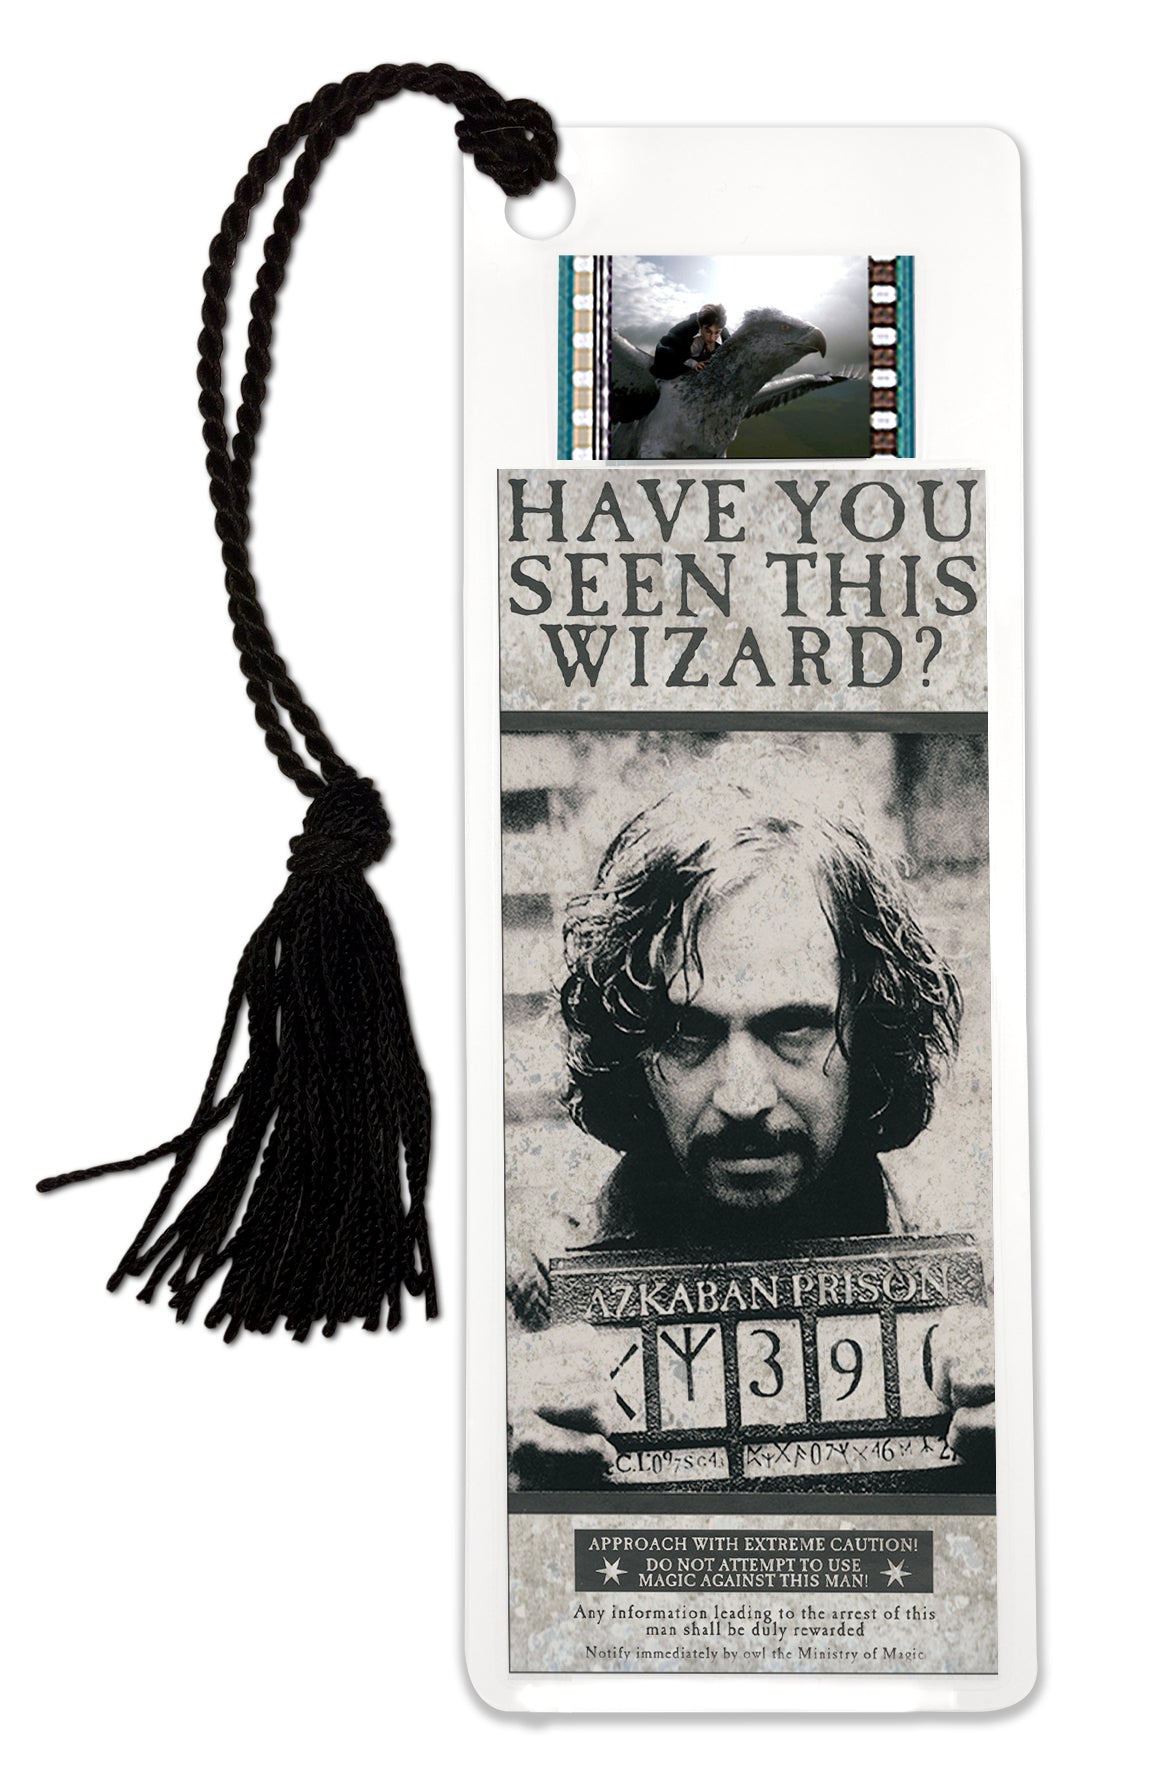 Harry Potter and the Prisoner of Azkaban (Sirius Black Wanted) FilmCells™ Bookmark USBM670